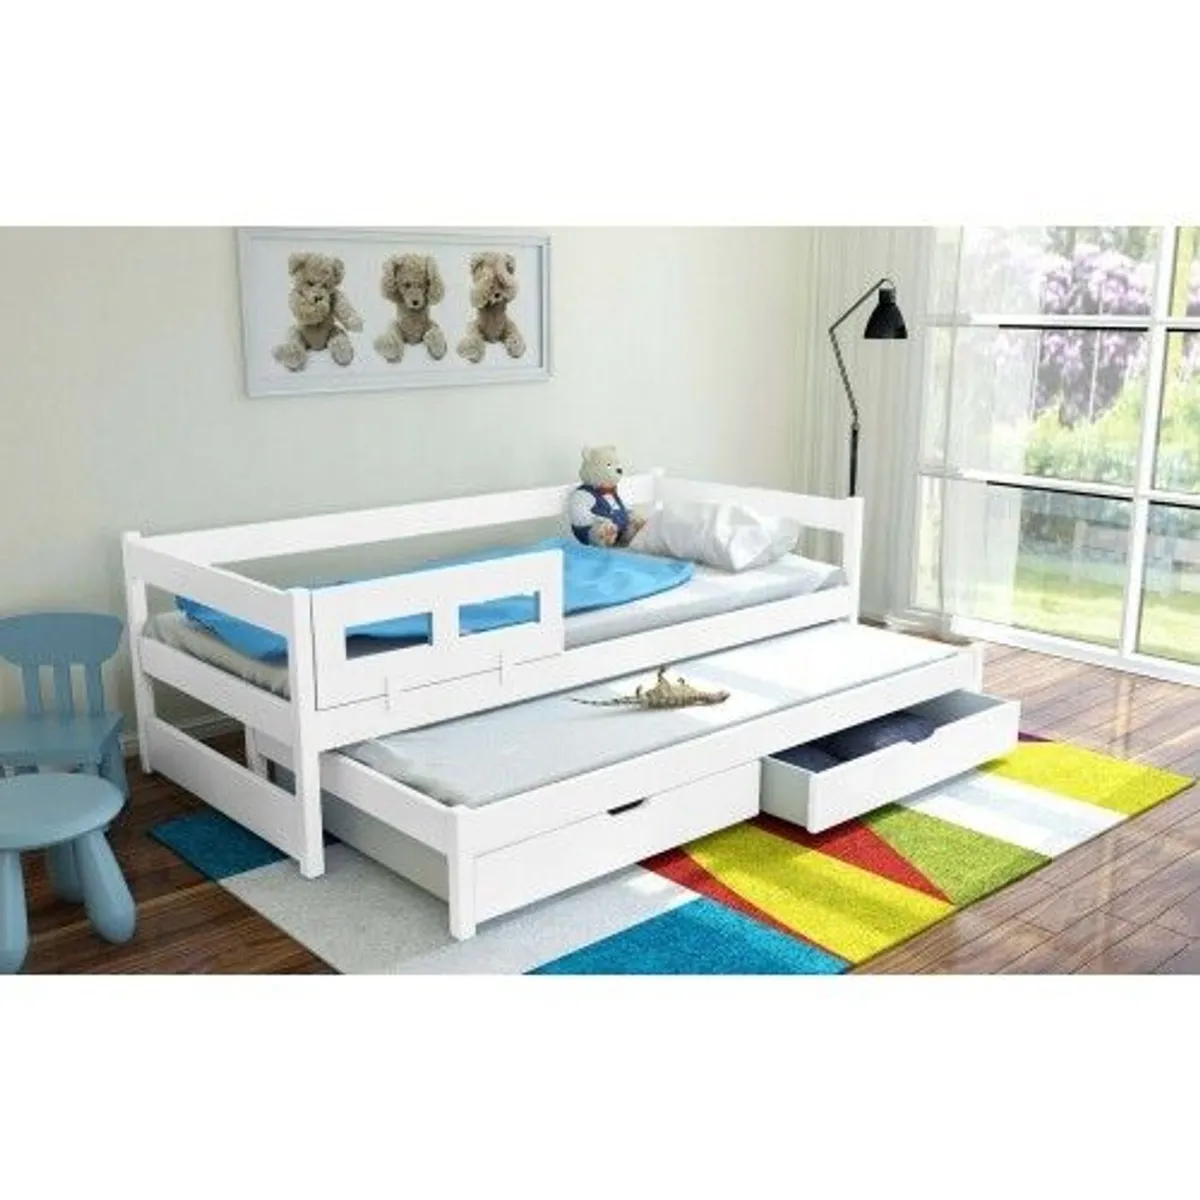 Kids Trundle Bed Tomek free mattresses and Delivery - Image 1